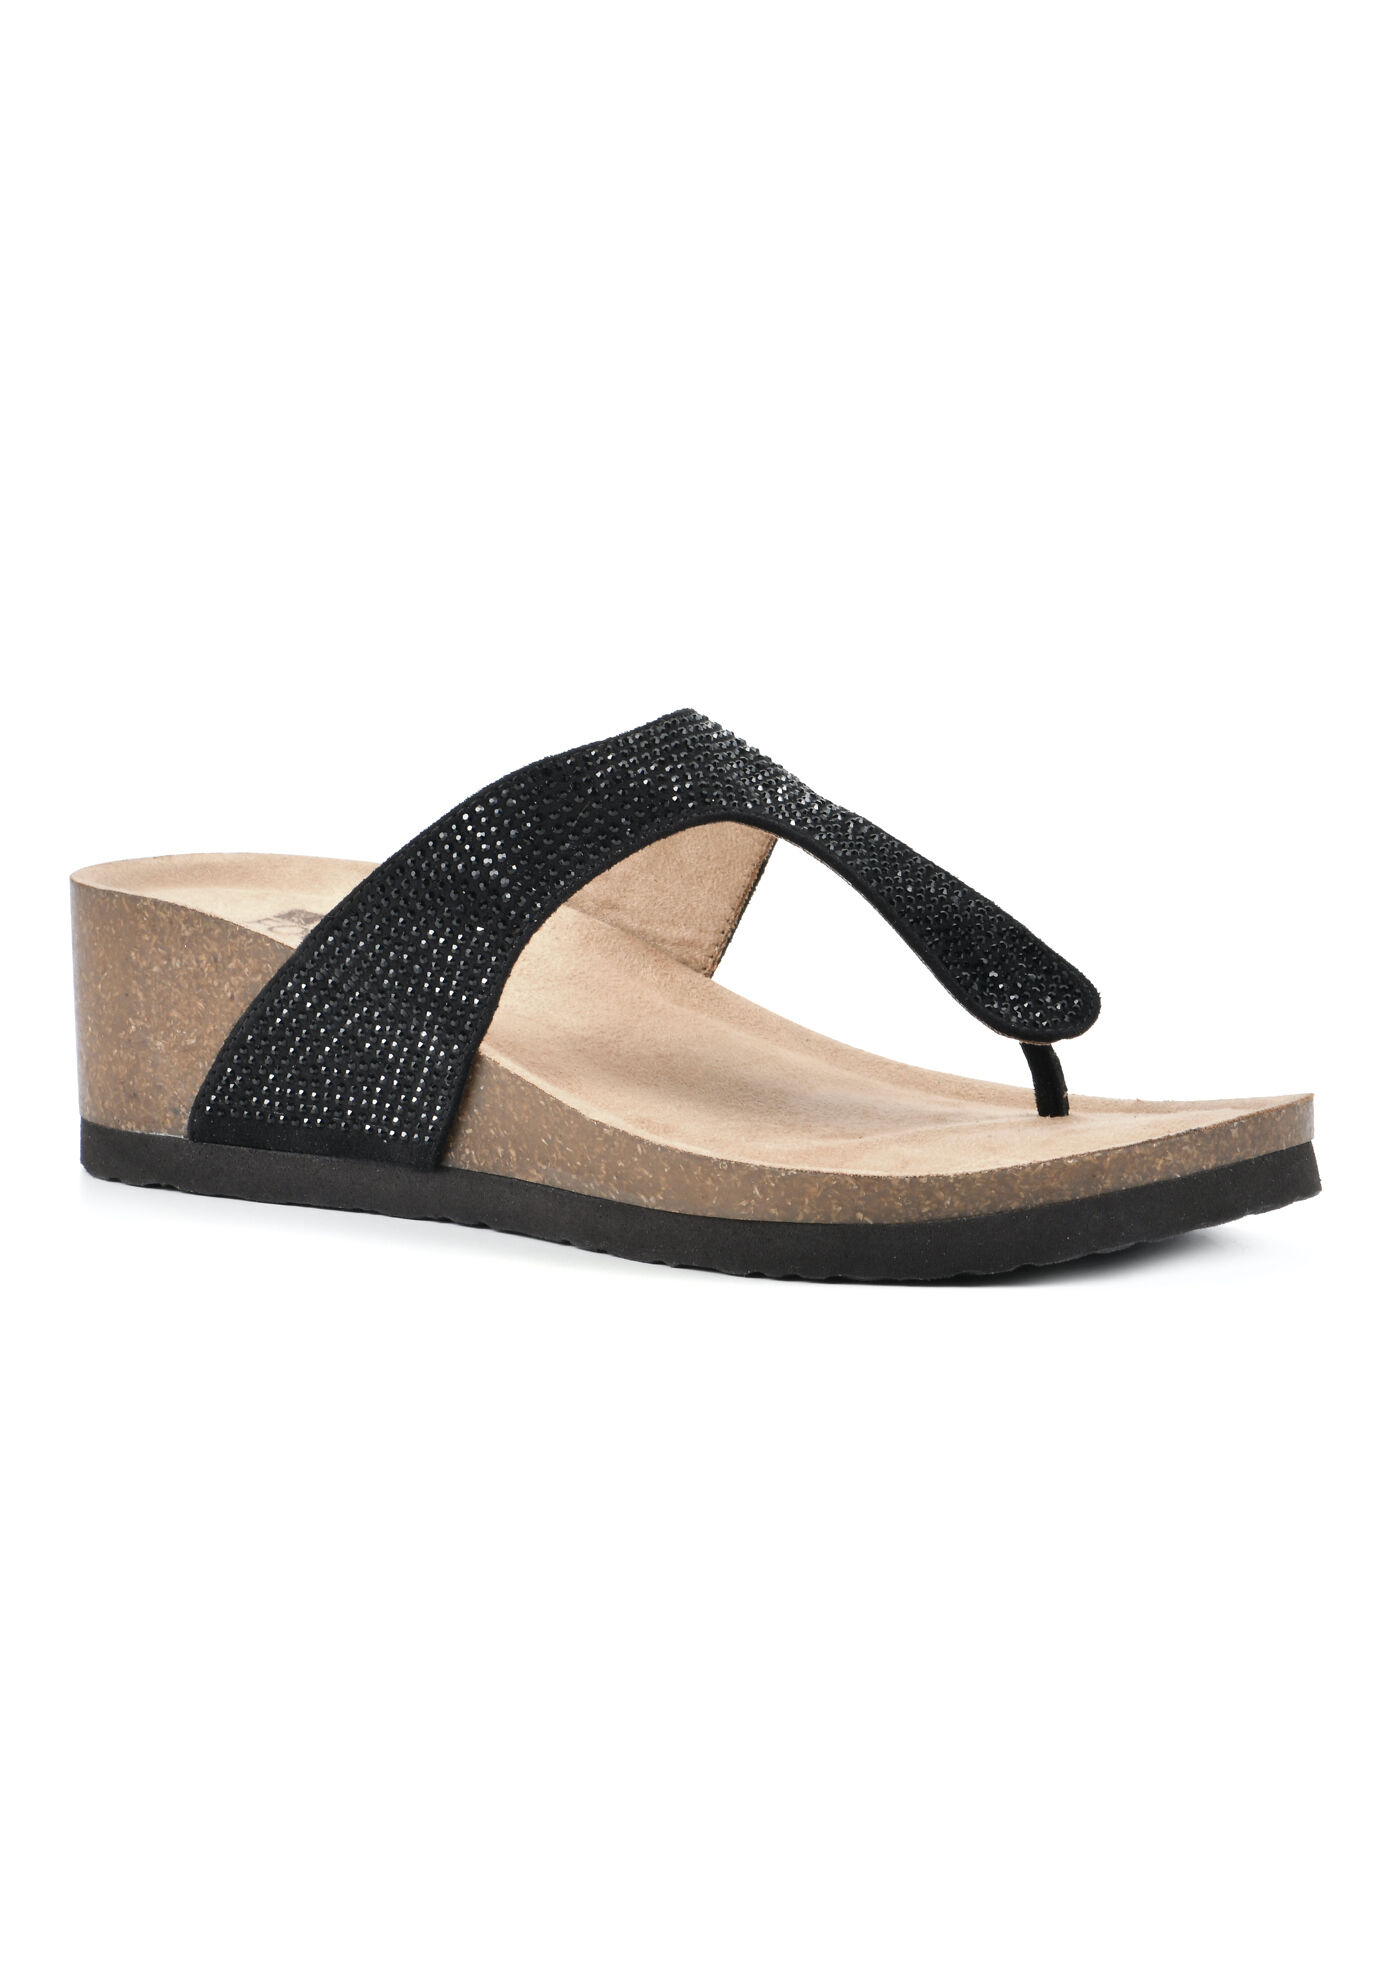 Women's Action Cork Wedge Sandal by White Mountain in Black Multi (Size 7 M)